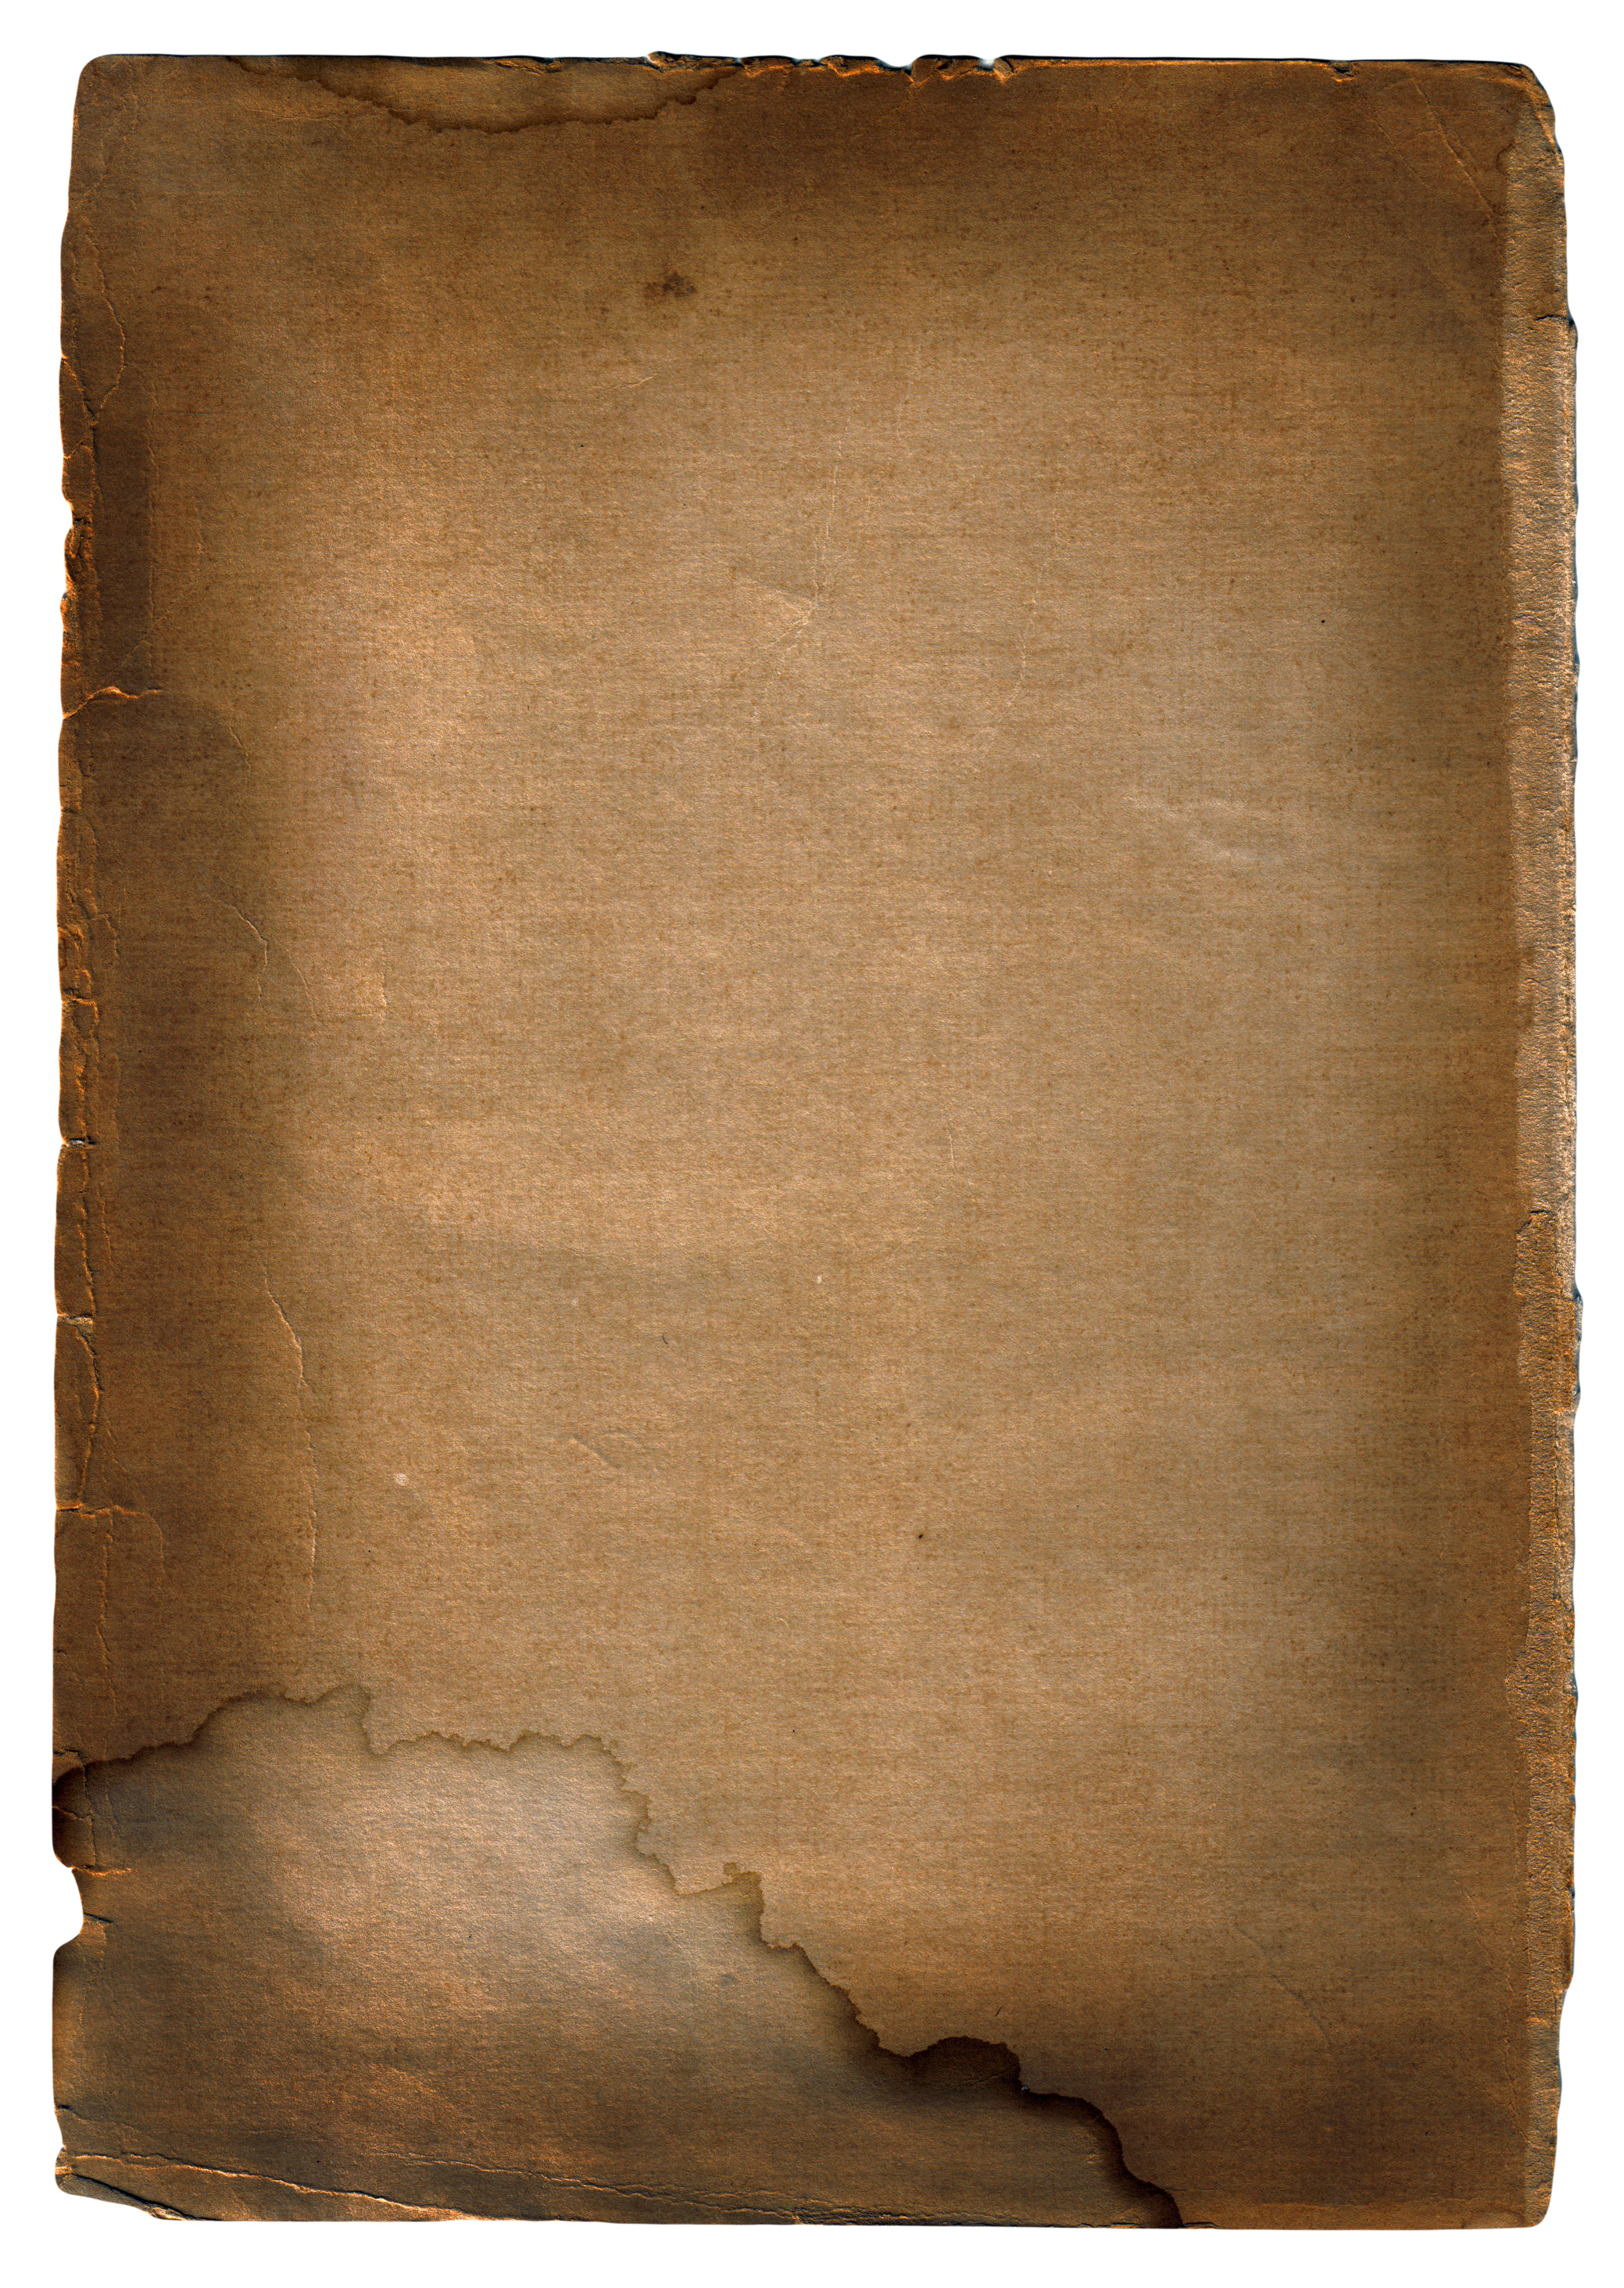 paper texture background, free image